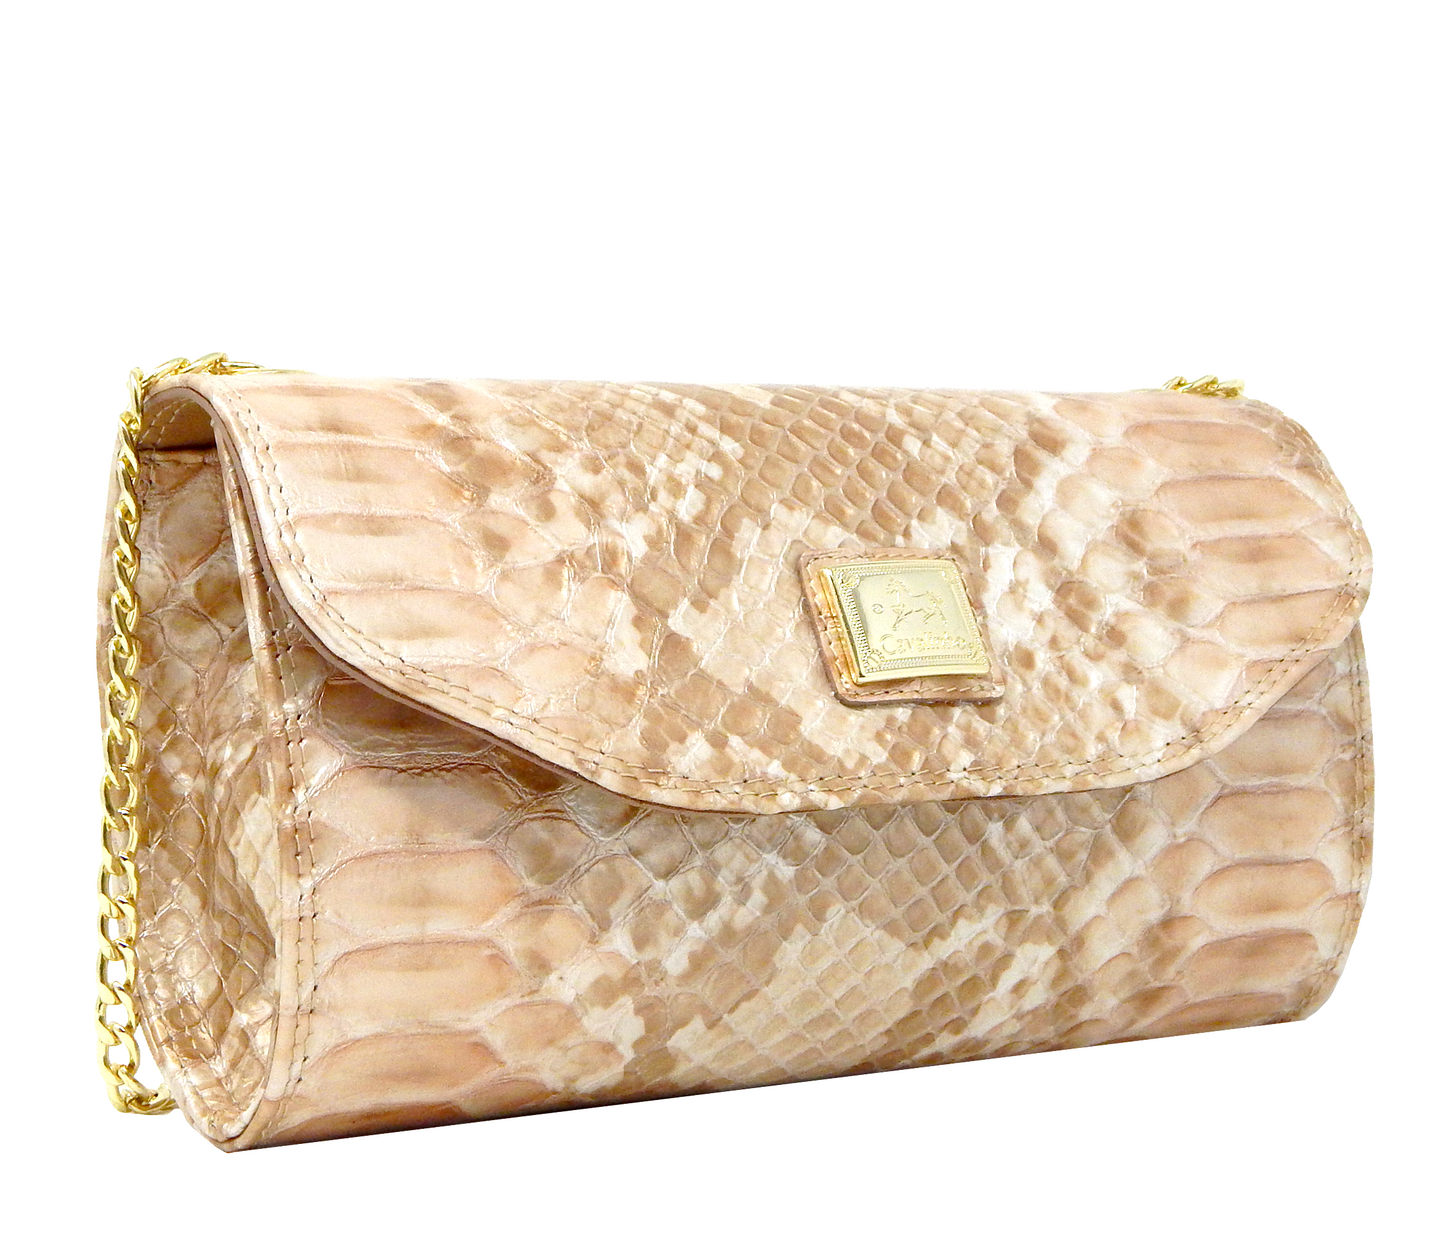 Cavalinho All In Patent Leather Clutch or Shoulder Bag - Beige / White - 18090491_05_2